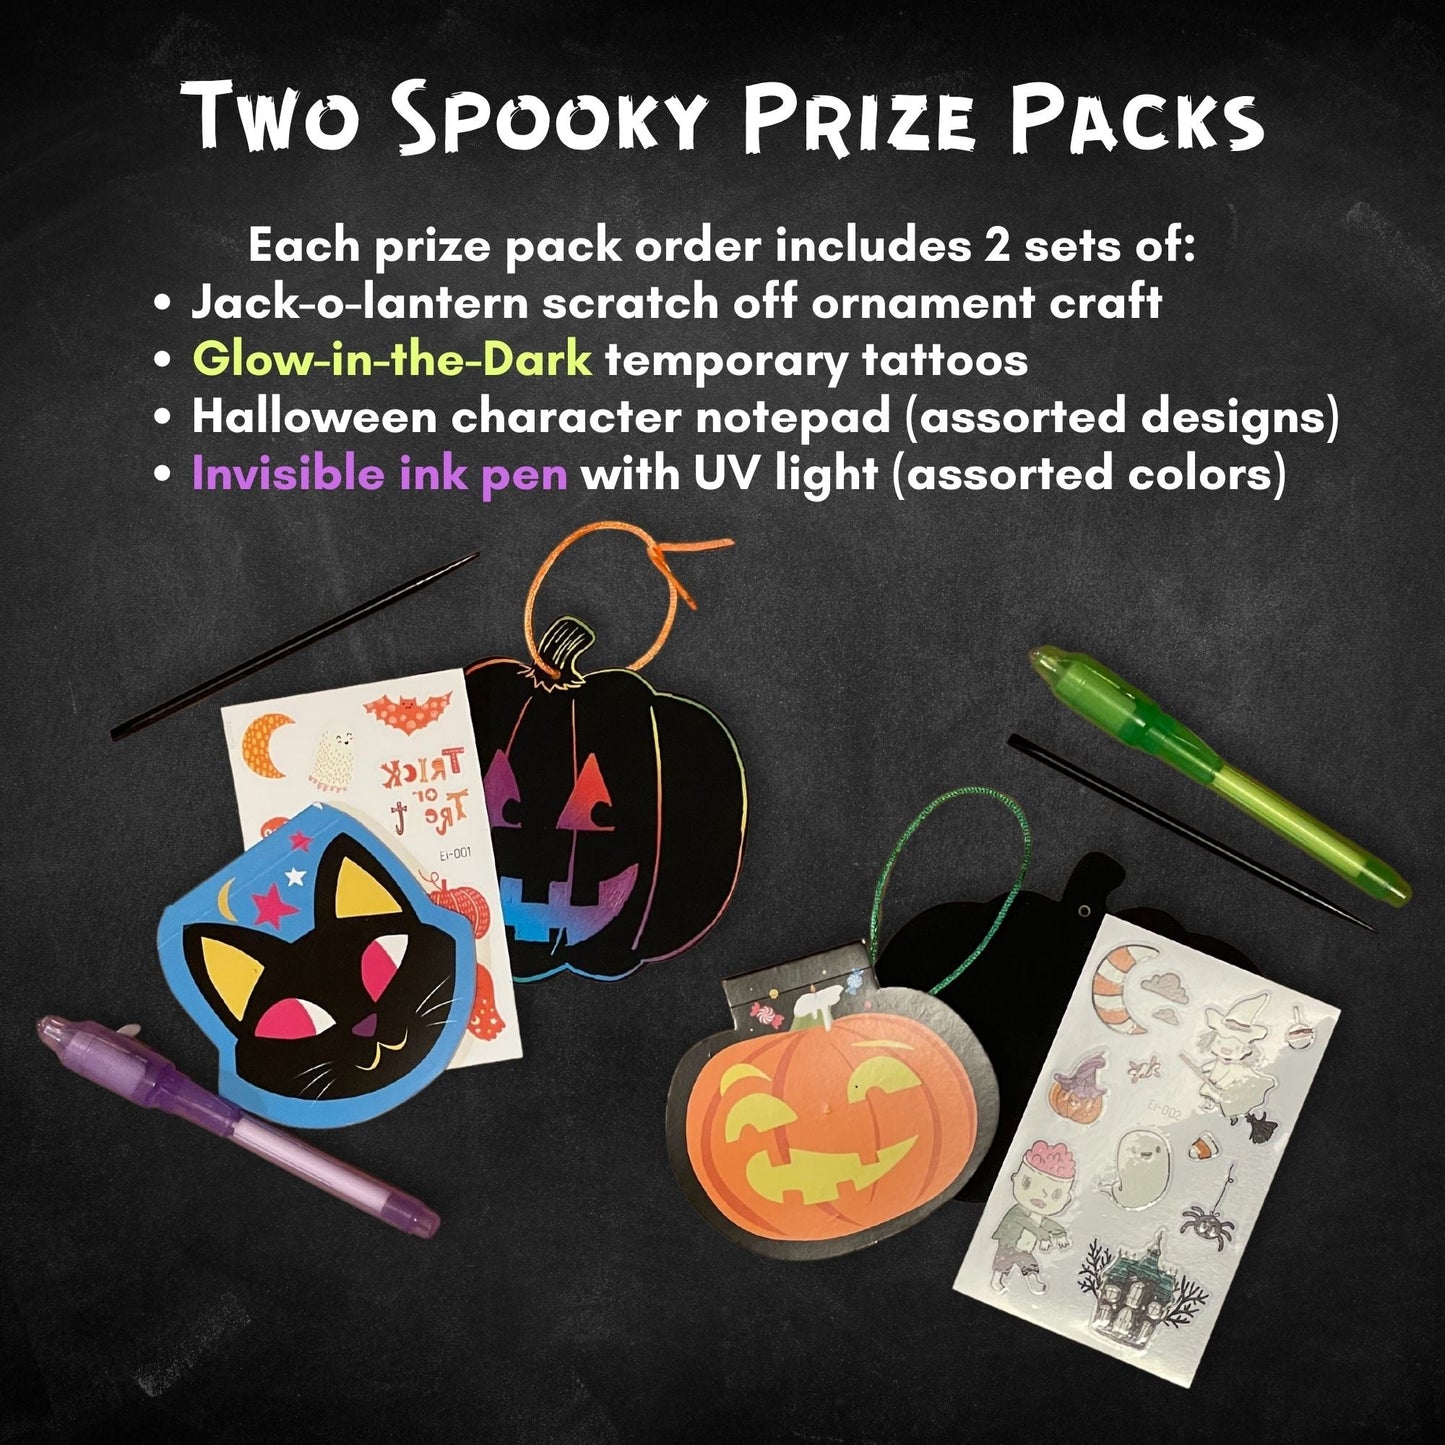 Titled: Two Spooky Prize Packs, the image shows 2 of each of the items included in the prize packs. Jack-o-lantern scratch off ornament craft, glow-in-the-dark temporary tattoos, halloween character notepads, Invisible Ink pen with UV light